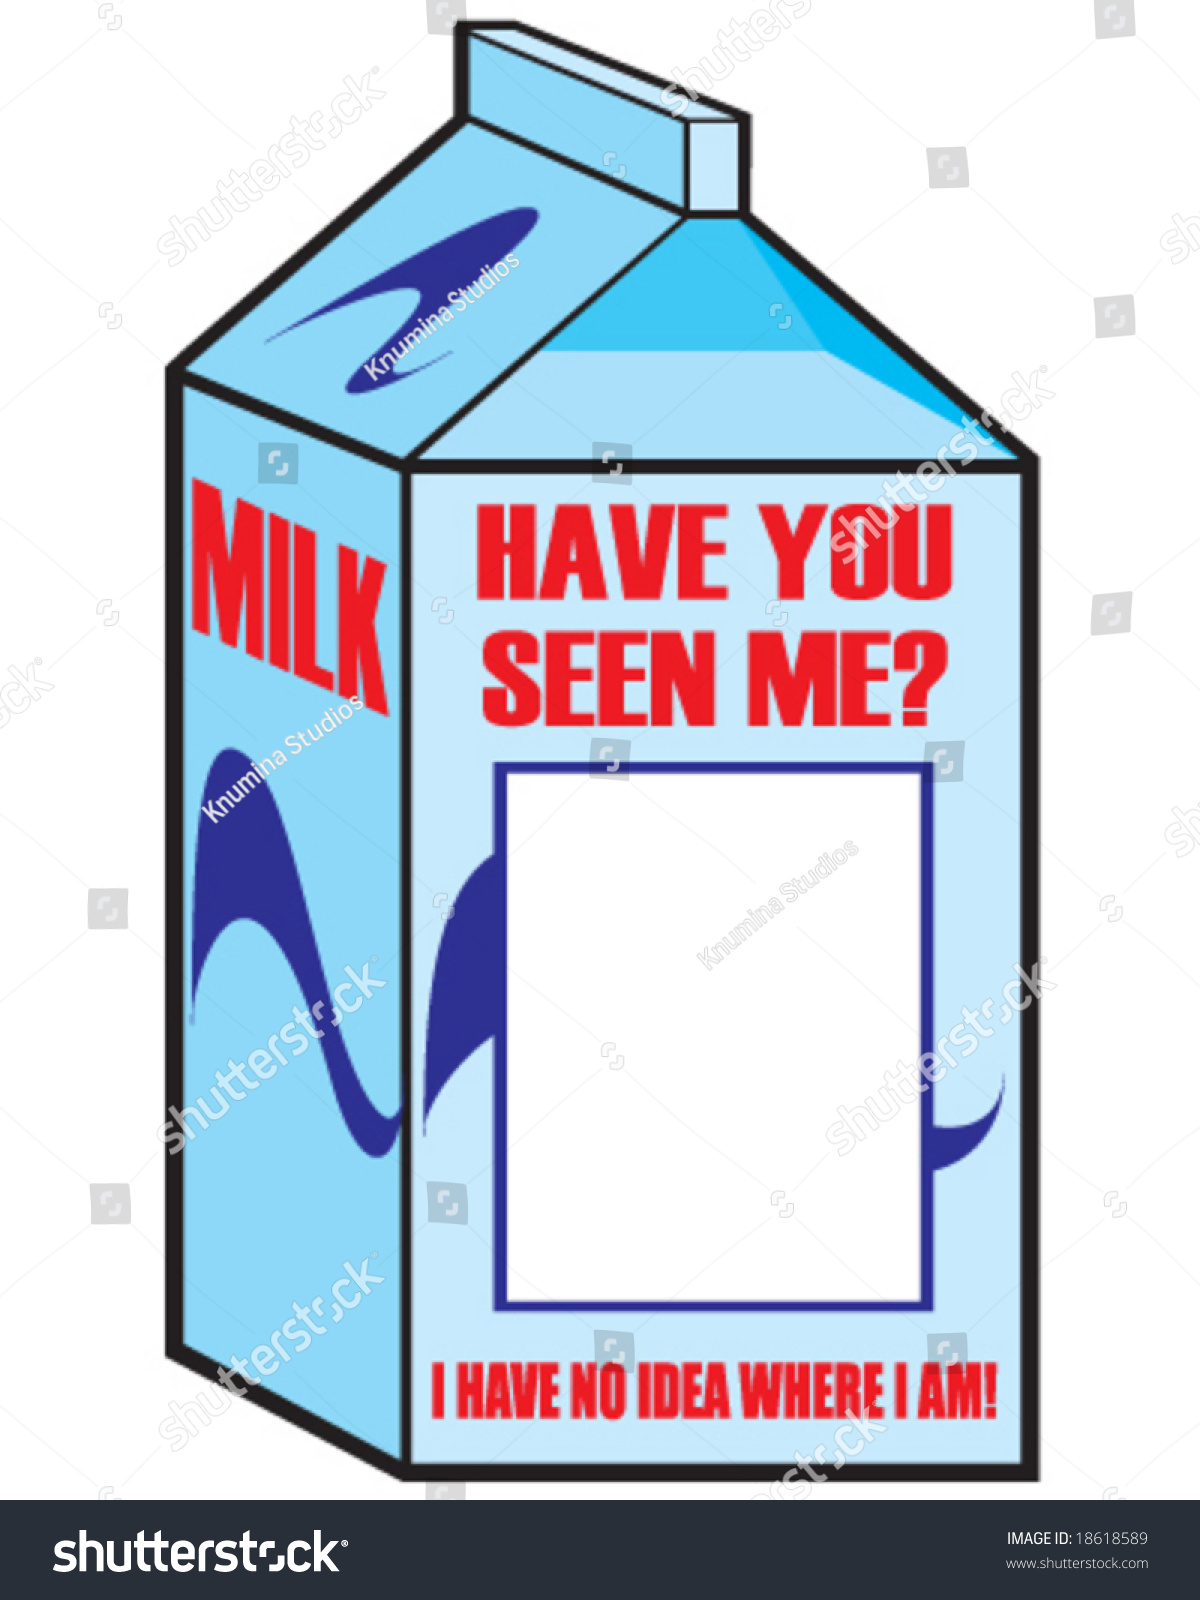 vector-milk-carton-with-space-for-your-picture-18618589-shutterstock